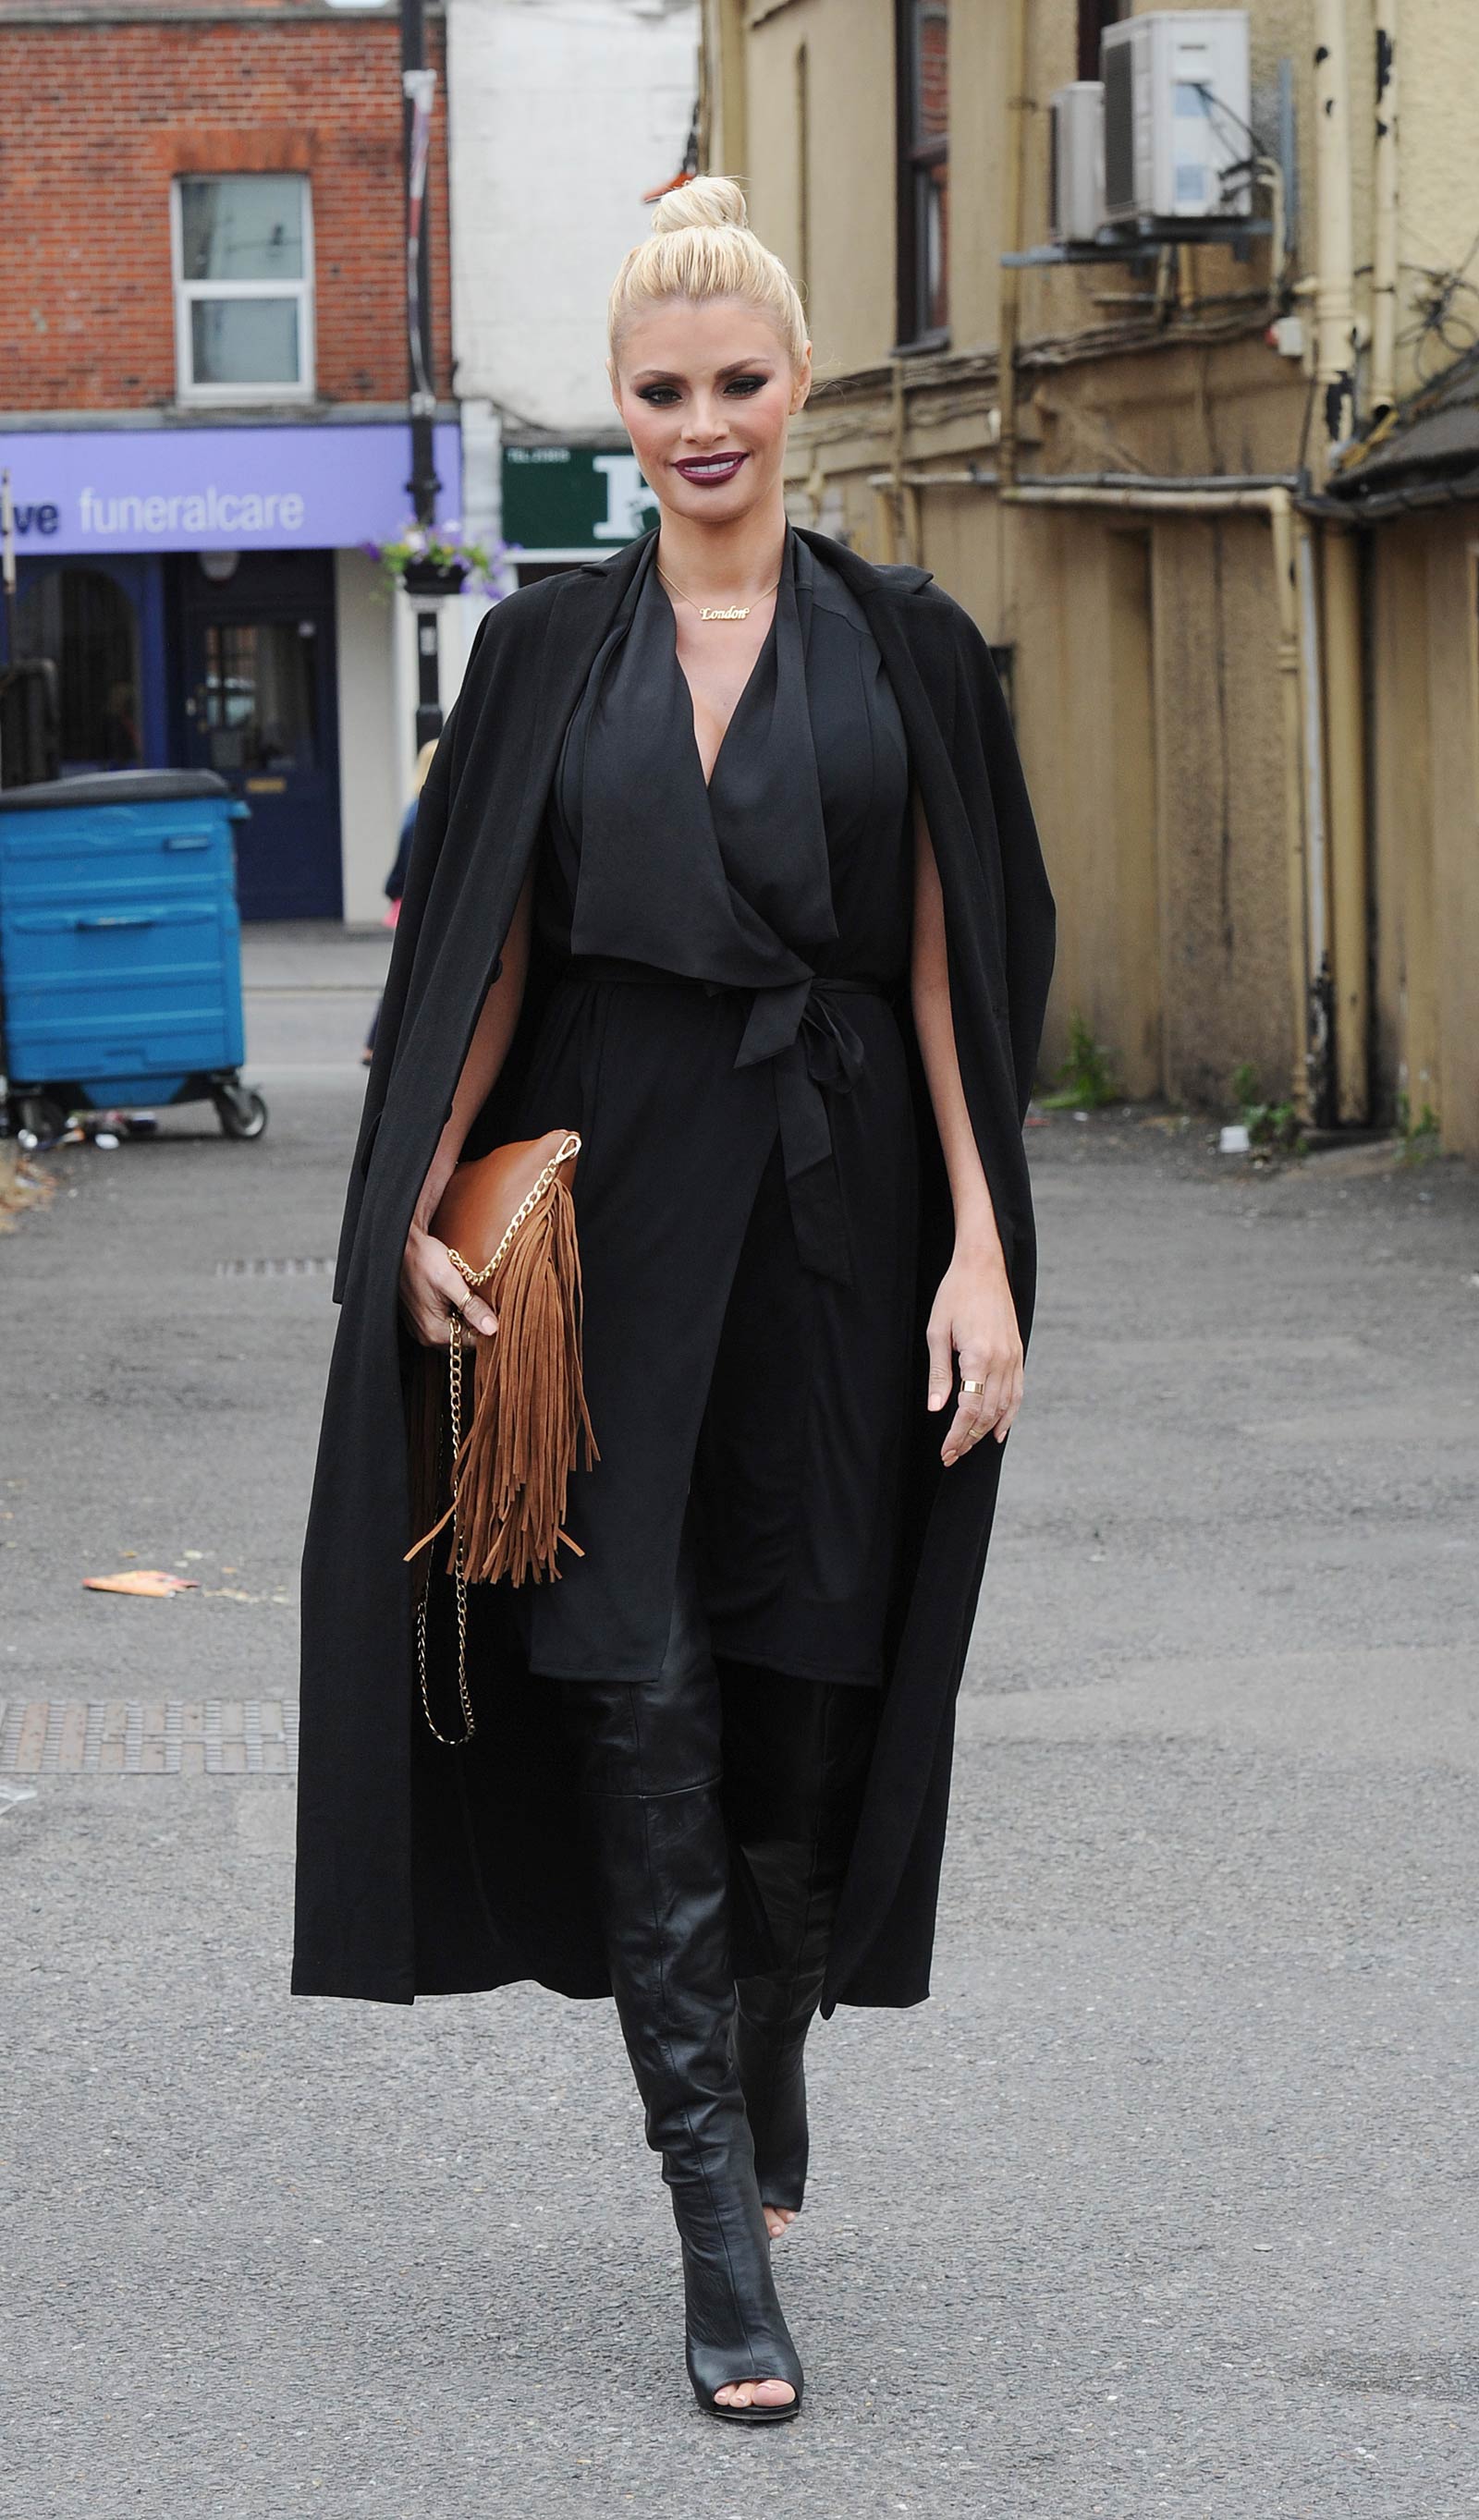 Chloe Sims filming scenes for TOWIE